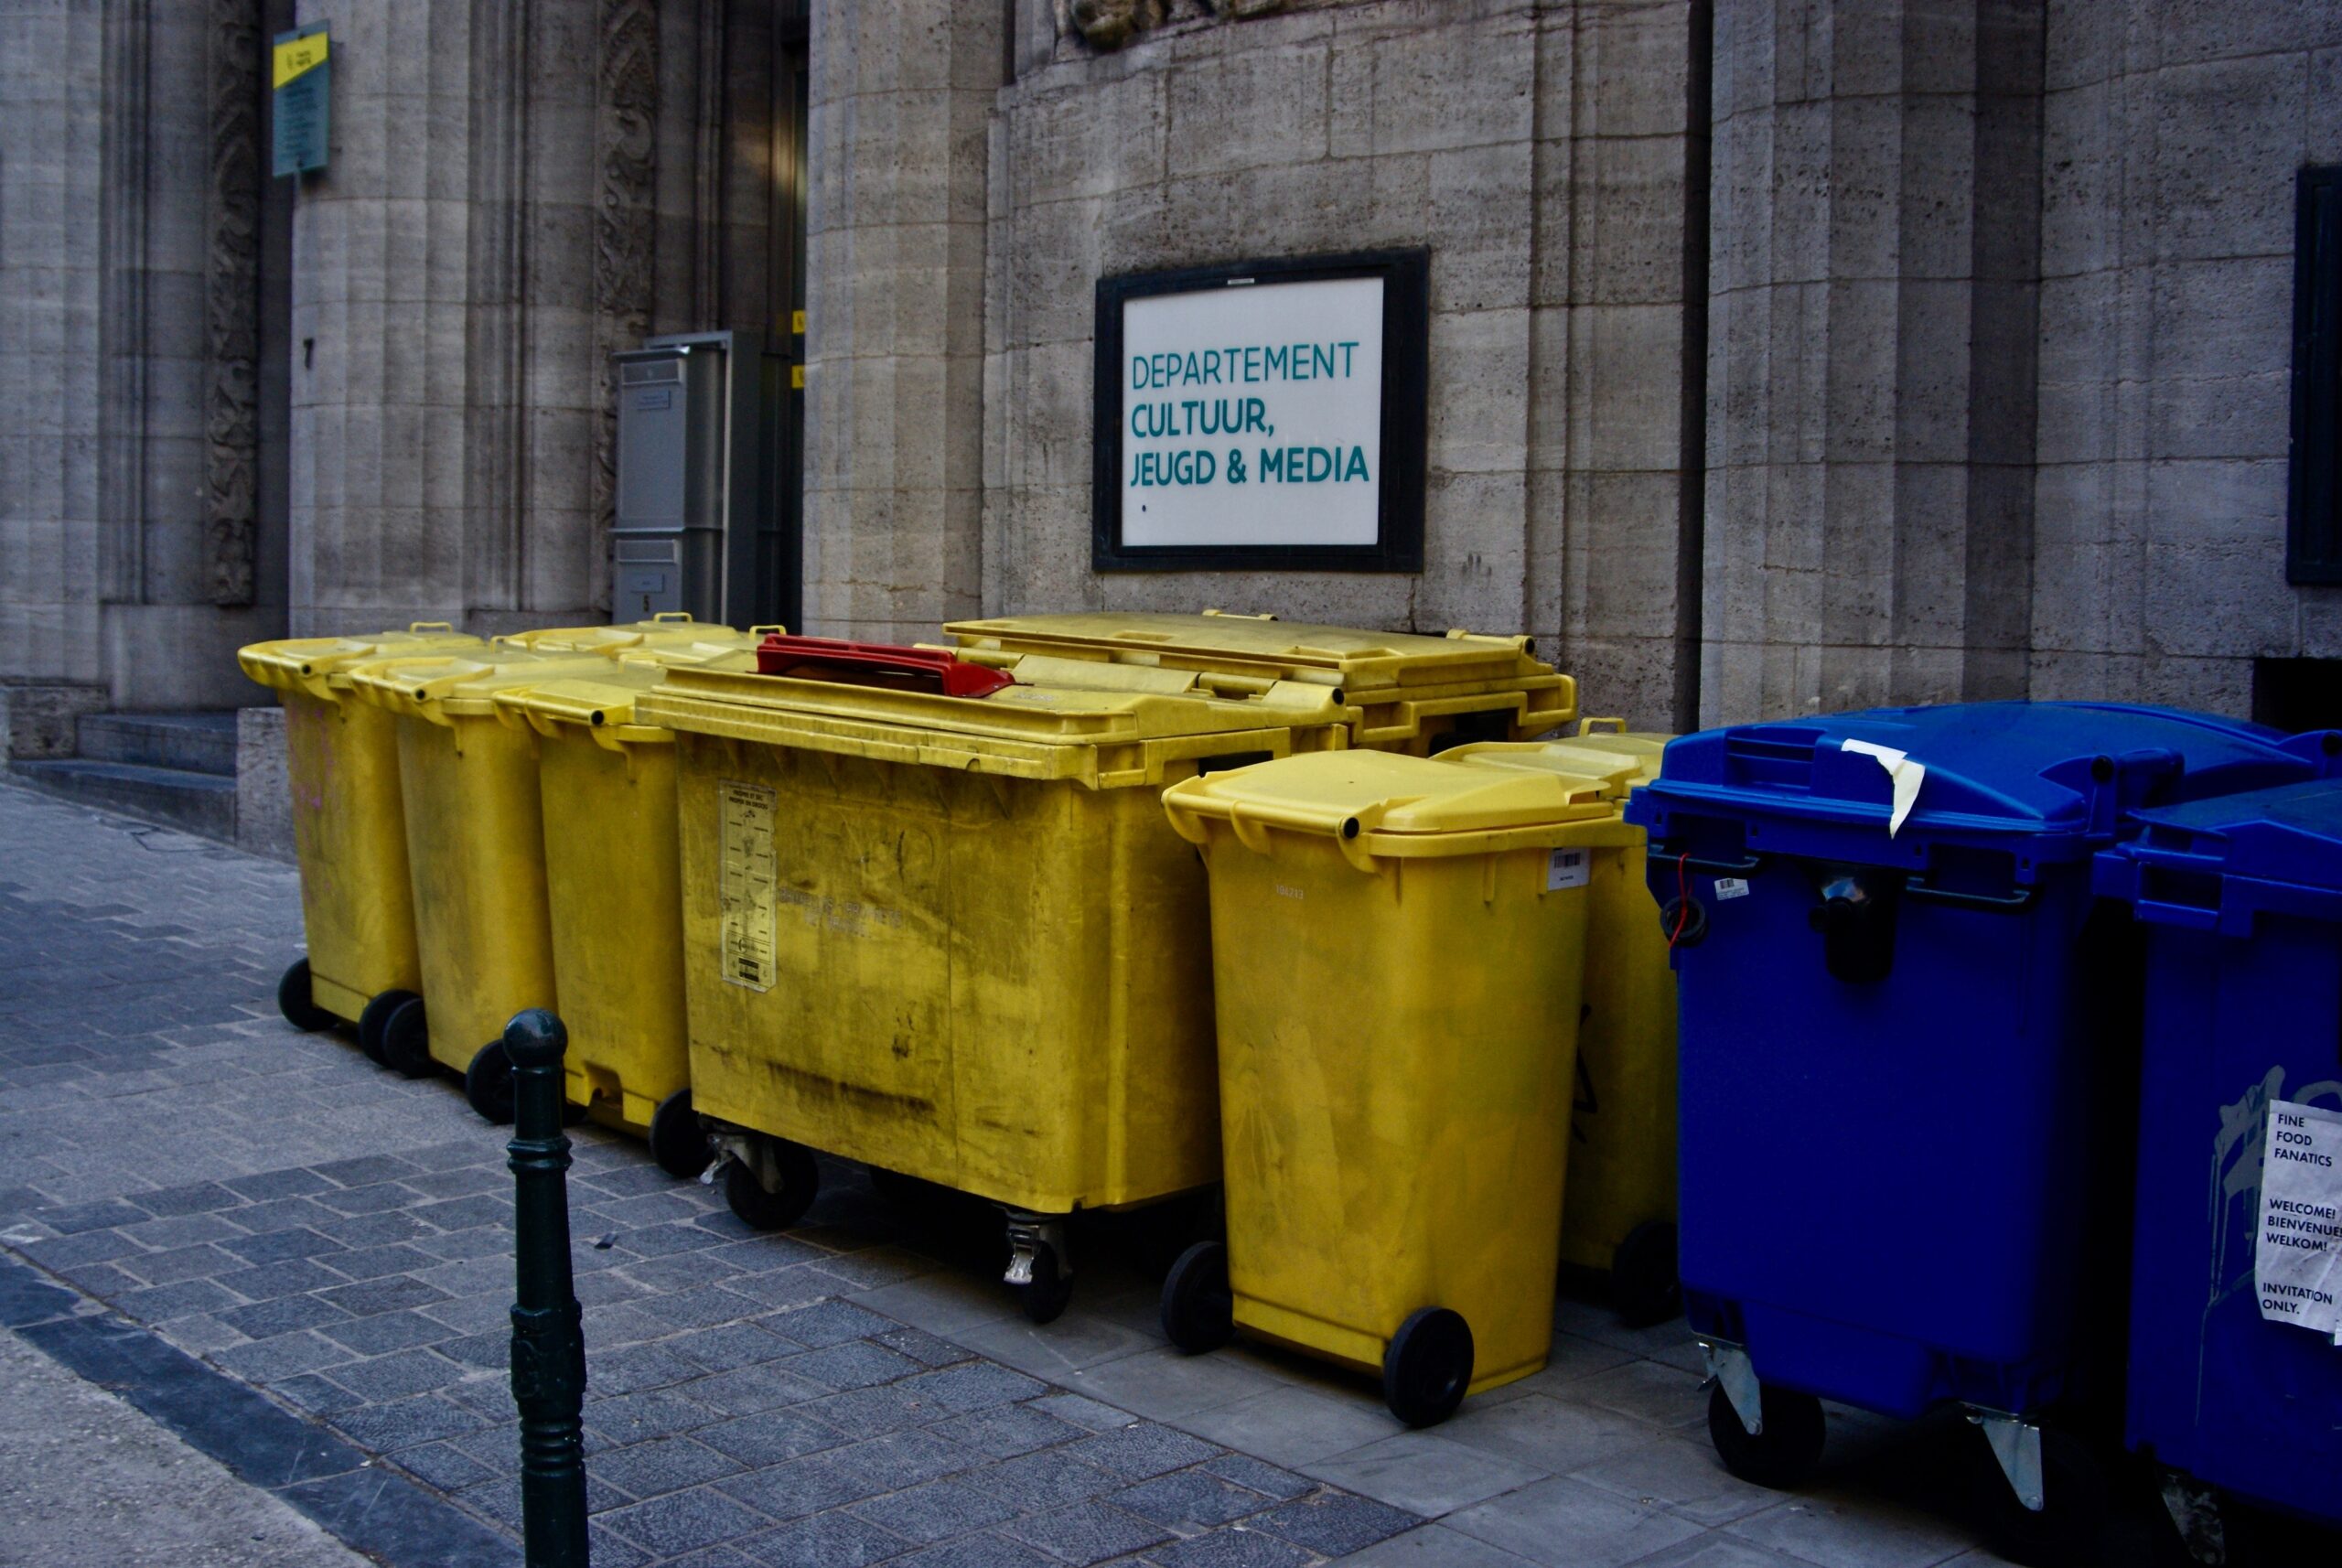 colleciton of two and four-wheel bins outside an important building.